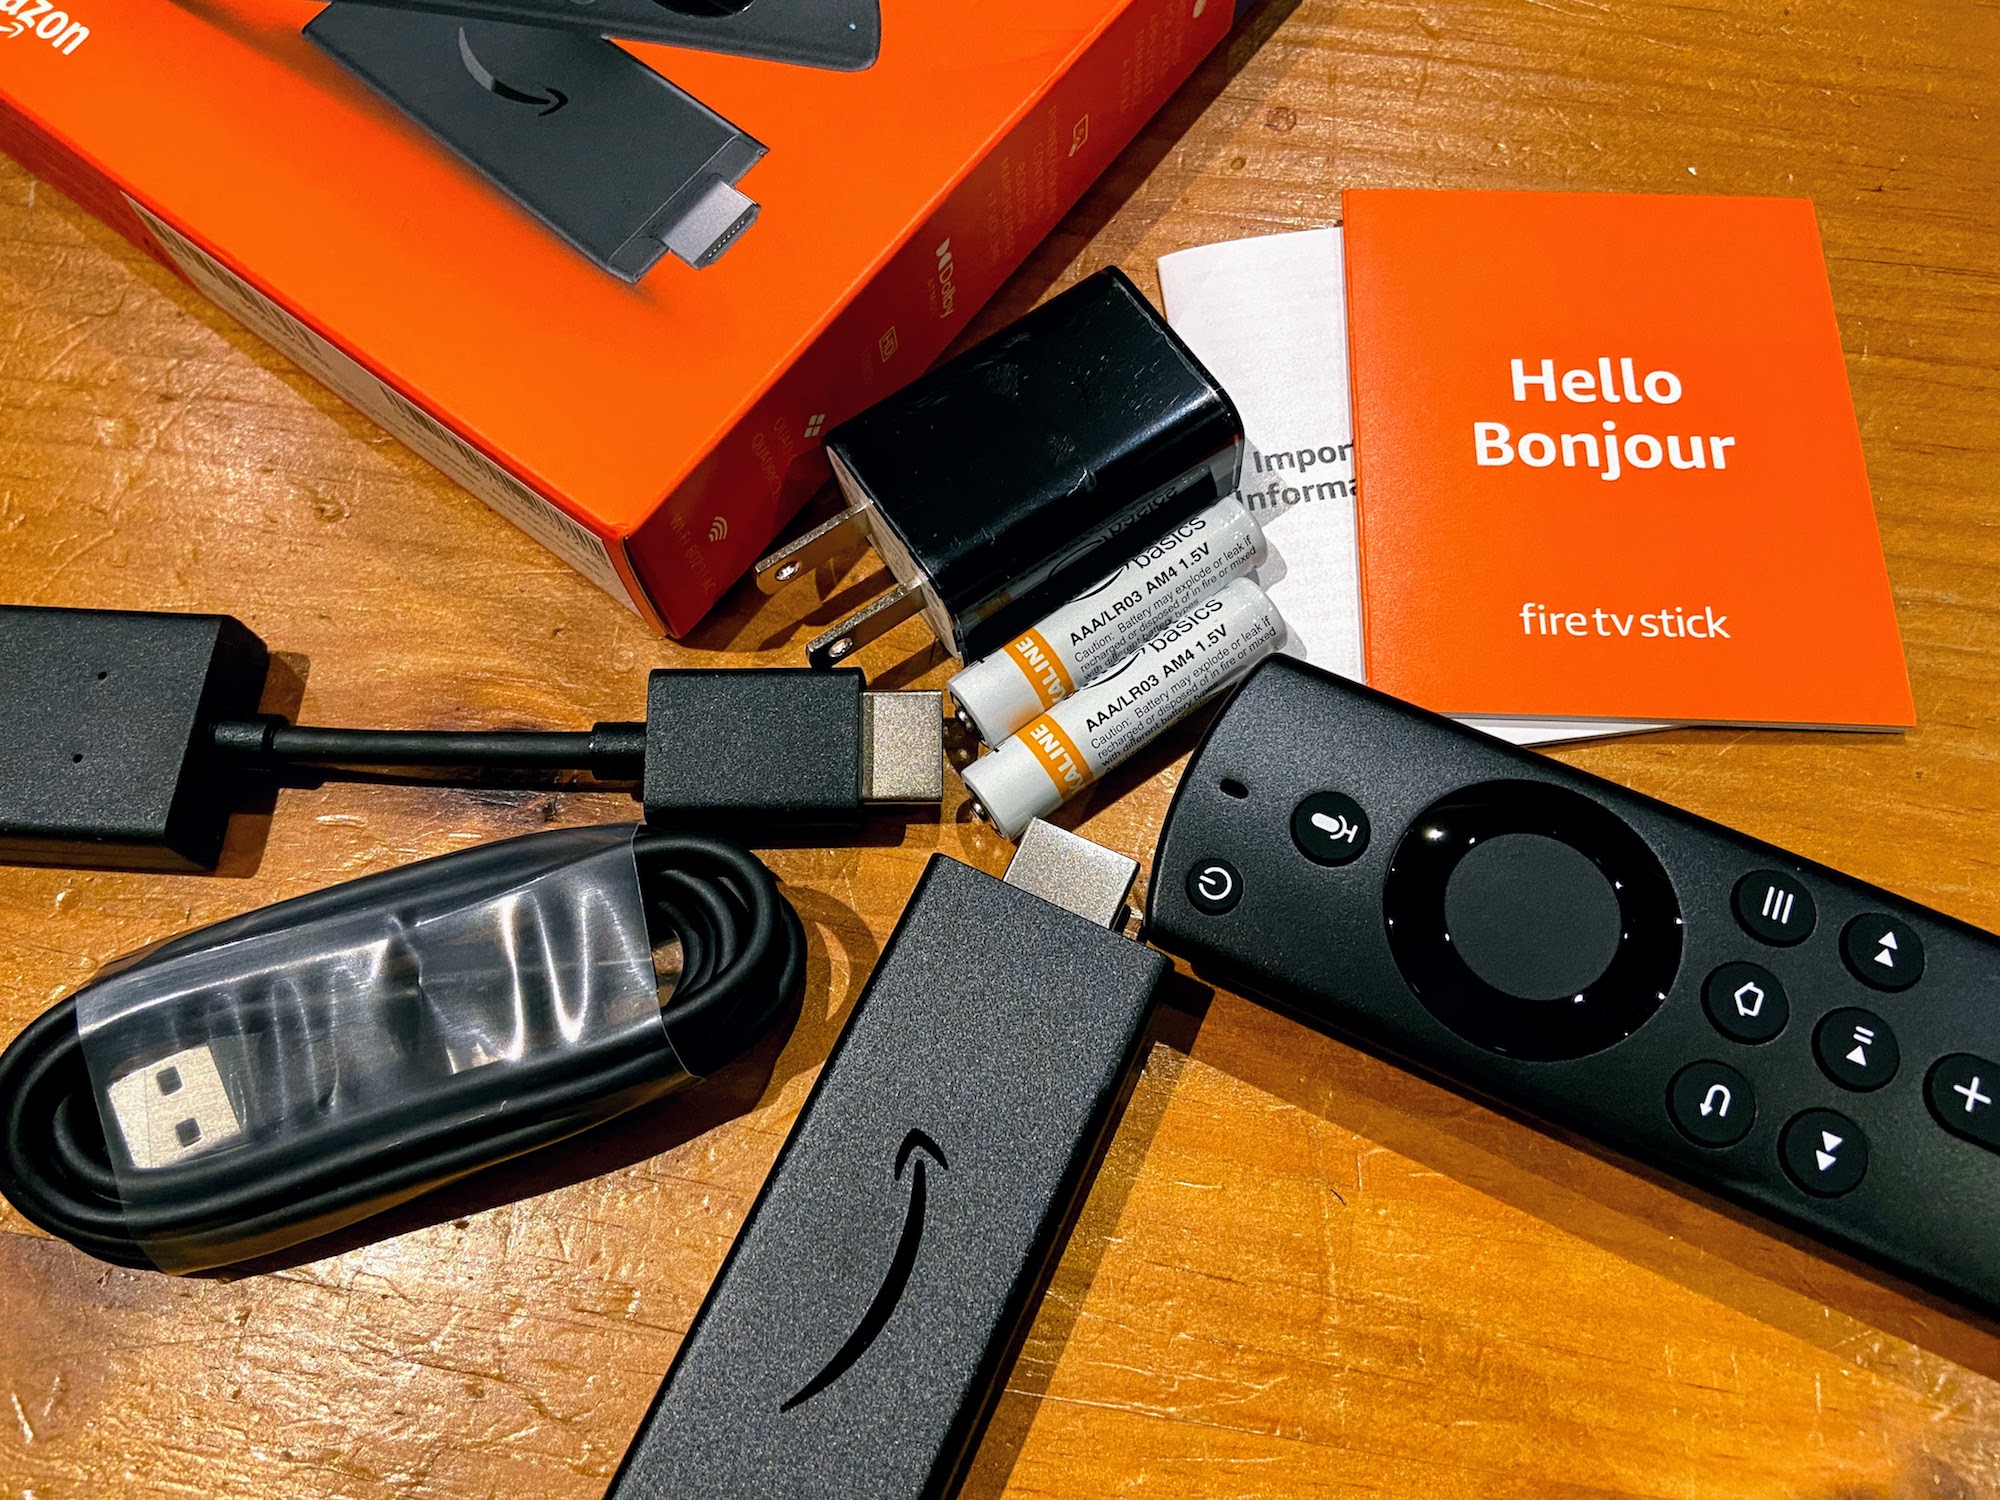 Xiaomi TV Stick 4K, review: new small Android TV player